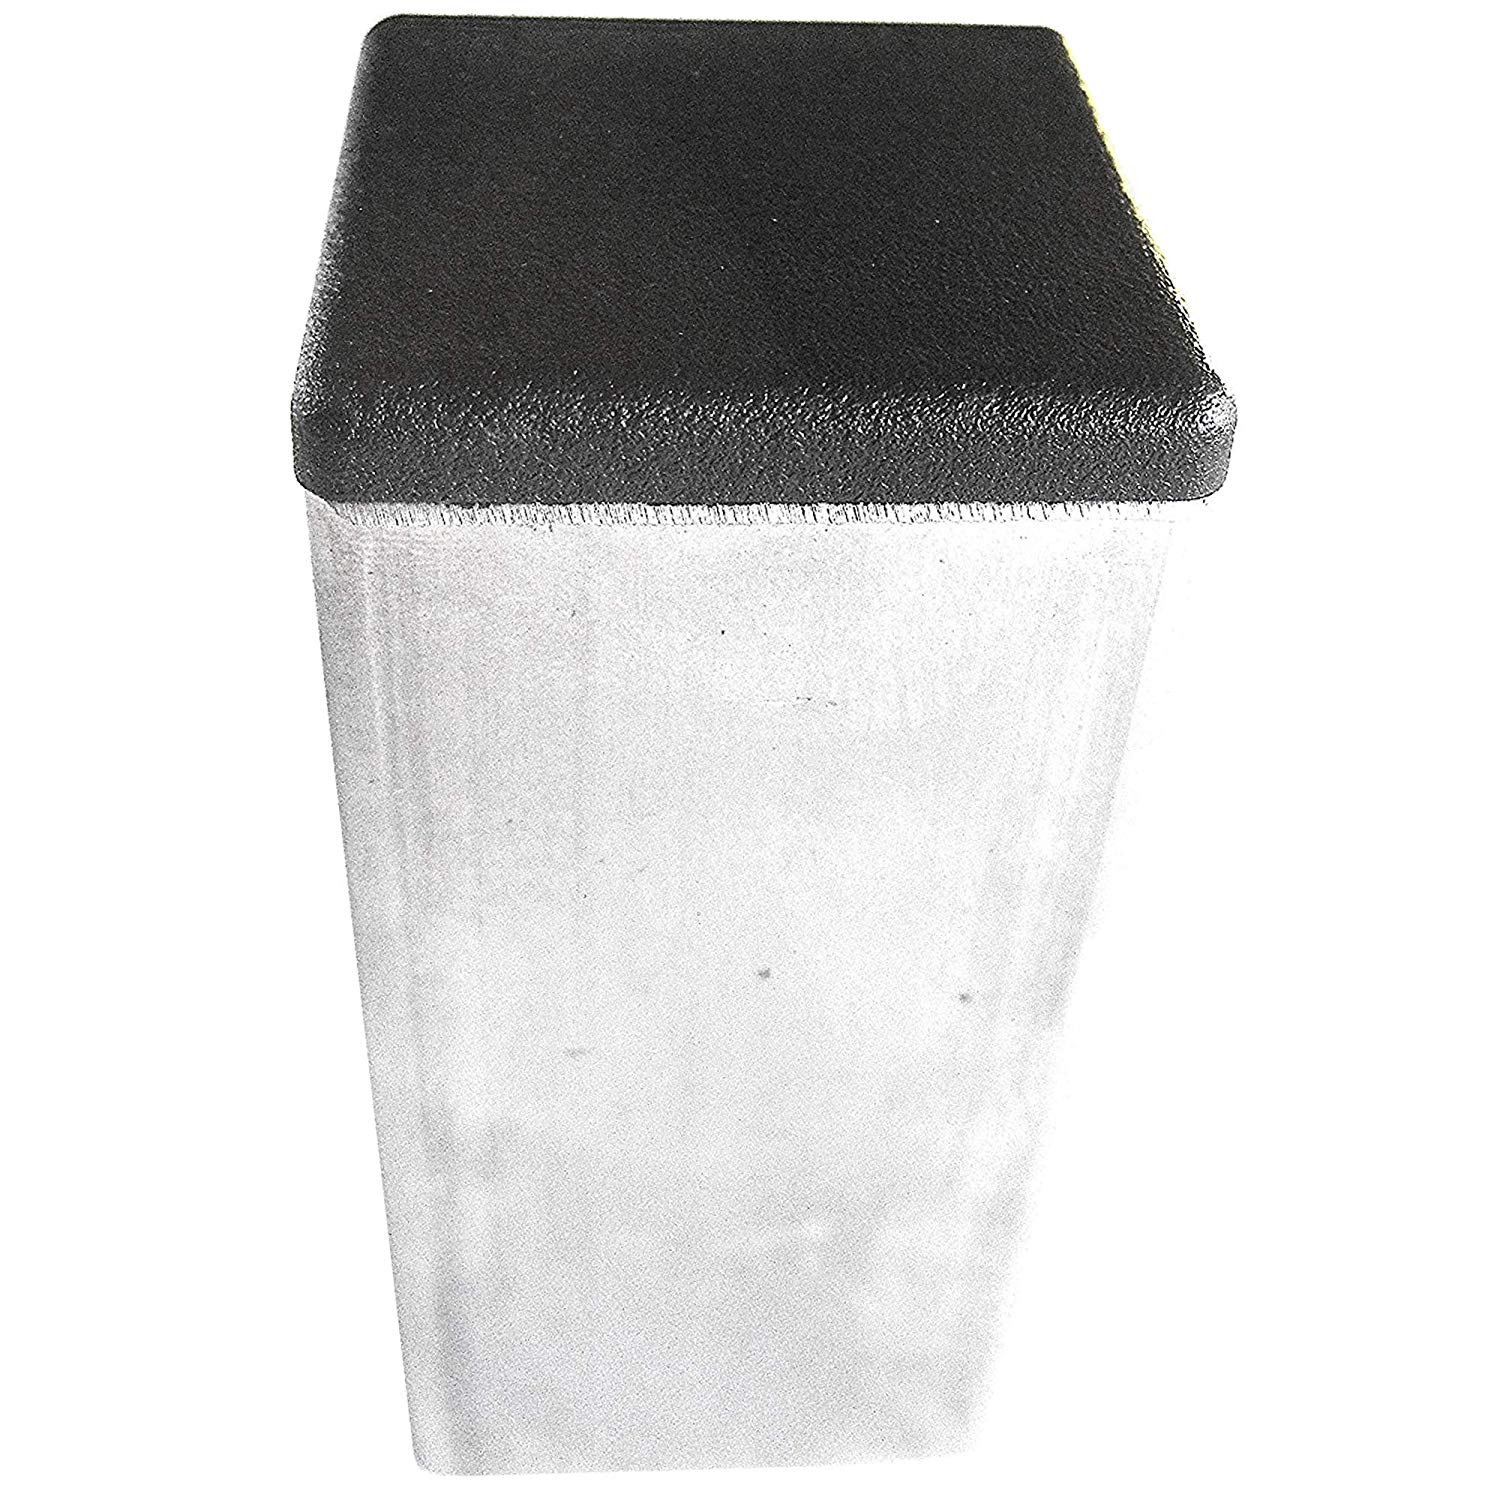 12 Cute Clear Plastic Vase Liners 2024 free download clear plastic vase liners of 10 pack 1 1 4 square tubing black plastic plug 1 25 inch end cap with regard to 10 pack 1 1 4 square tubing black plastic plug 1 25 inch end cap 1 1 4 fence post